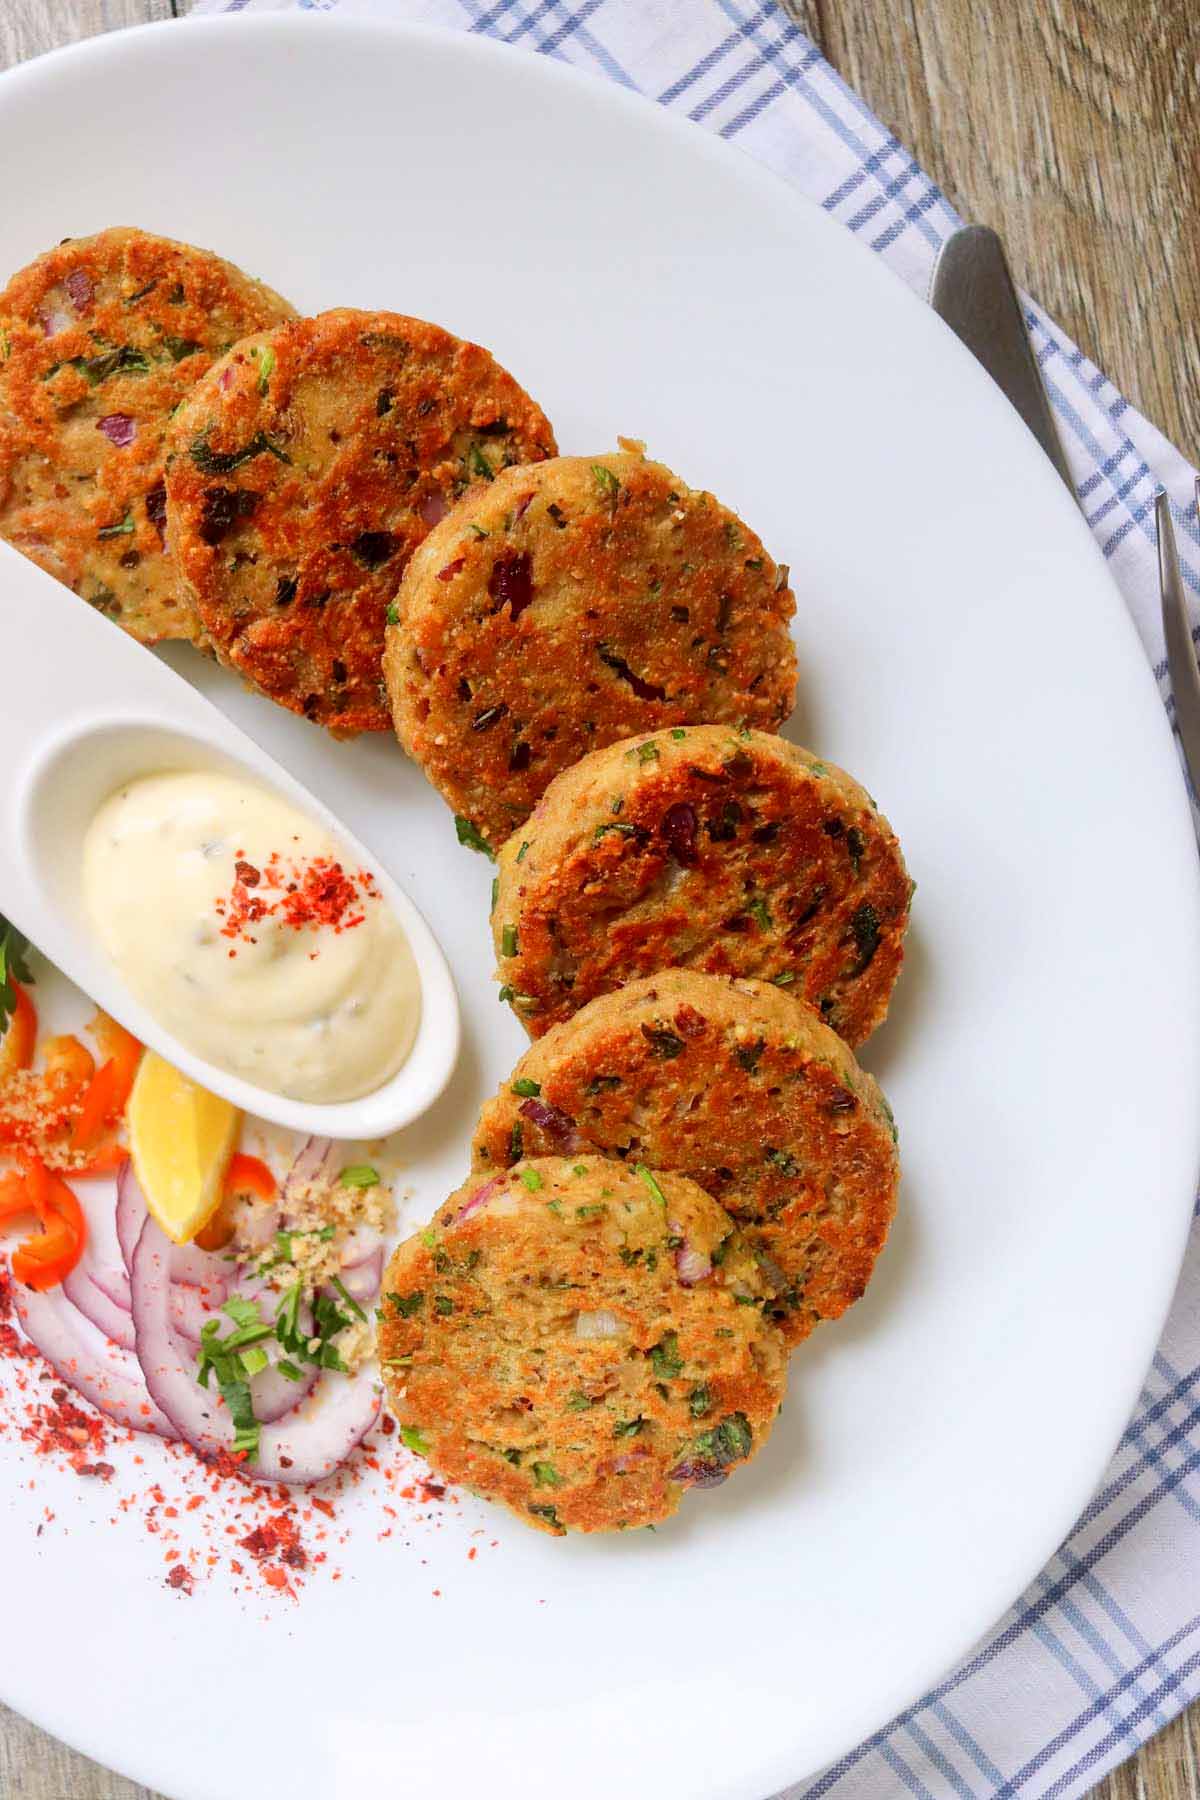 Tuna patties on a plate with a white sauce.